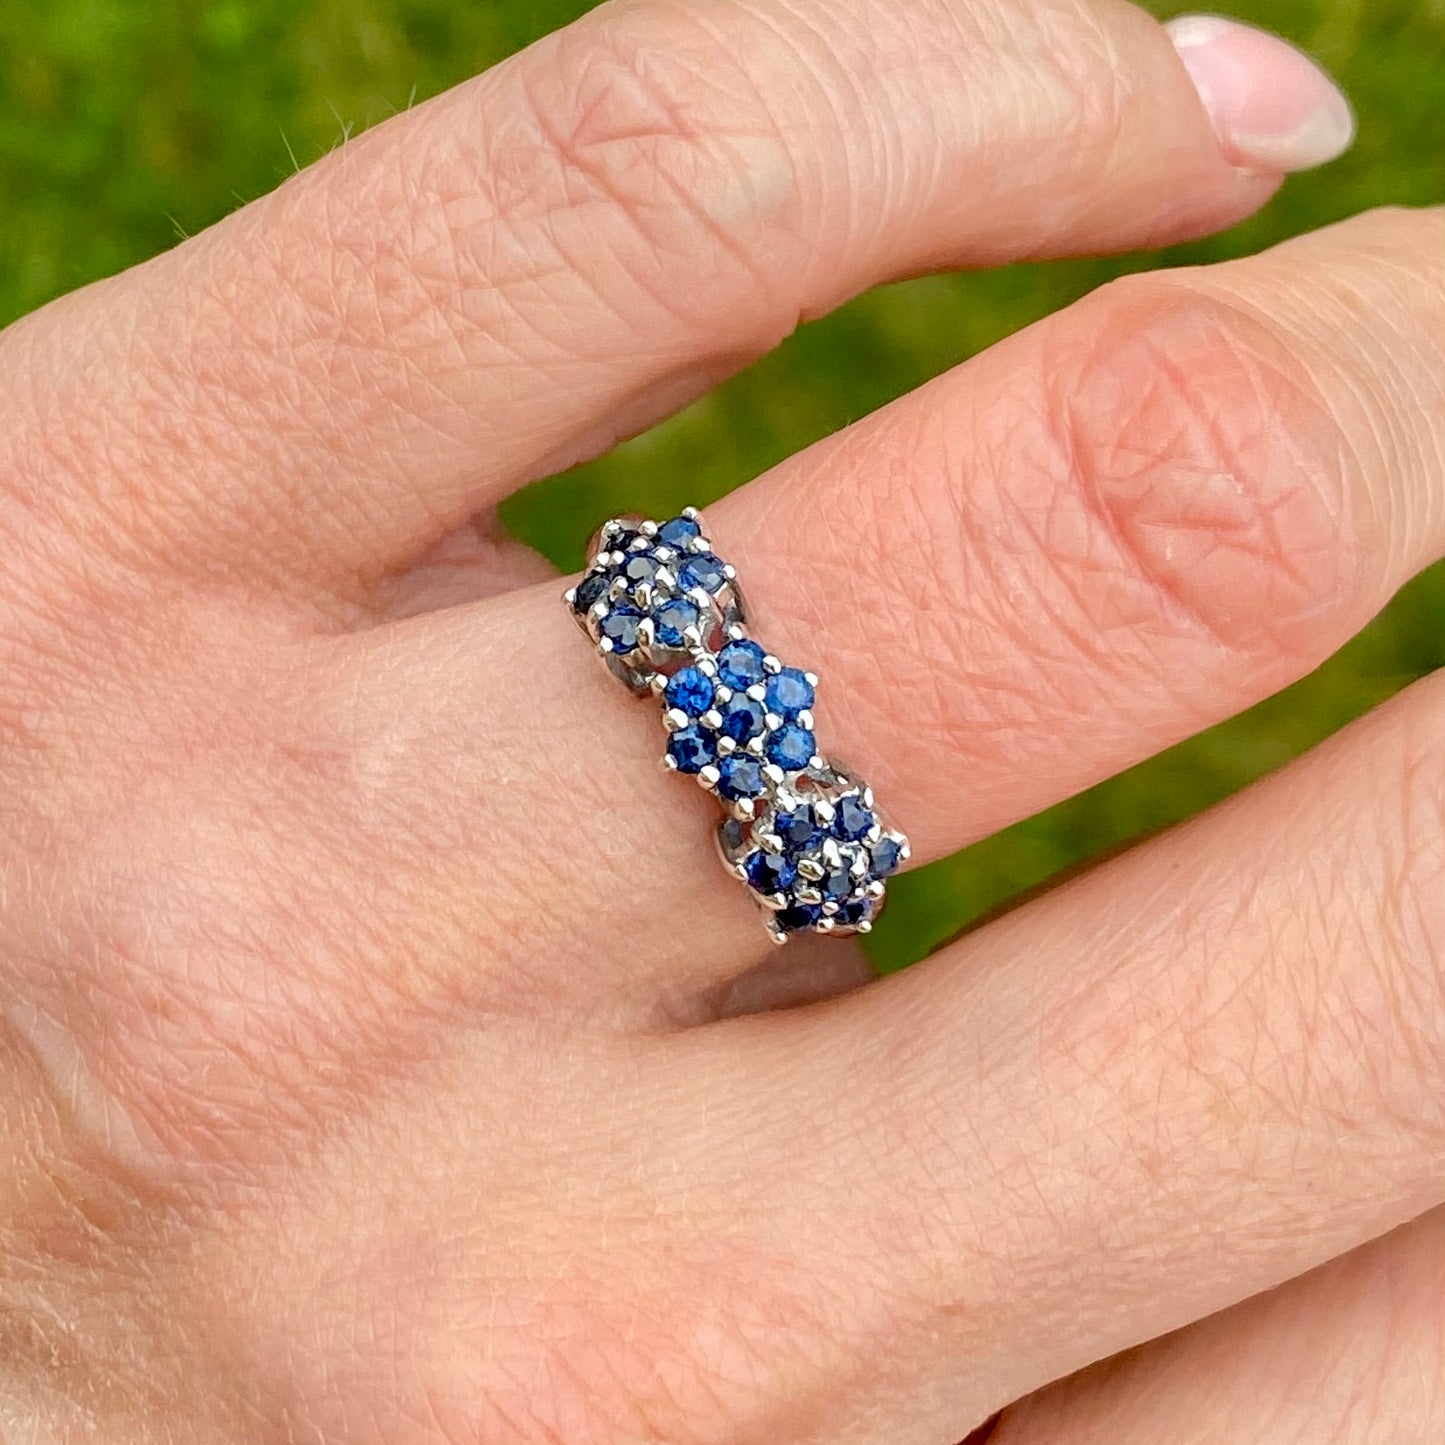 9ct White Gold Sapphire Floral Trilogy Ring - John Ross Jewellers